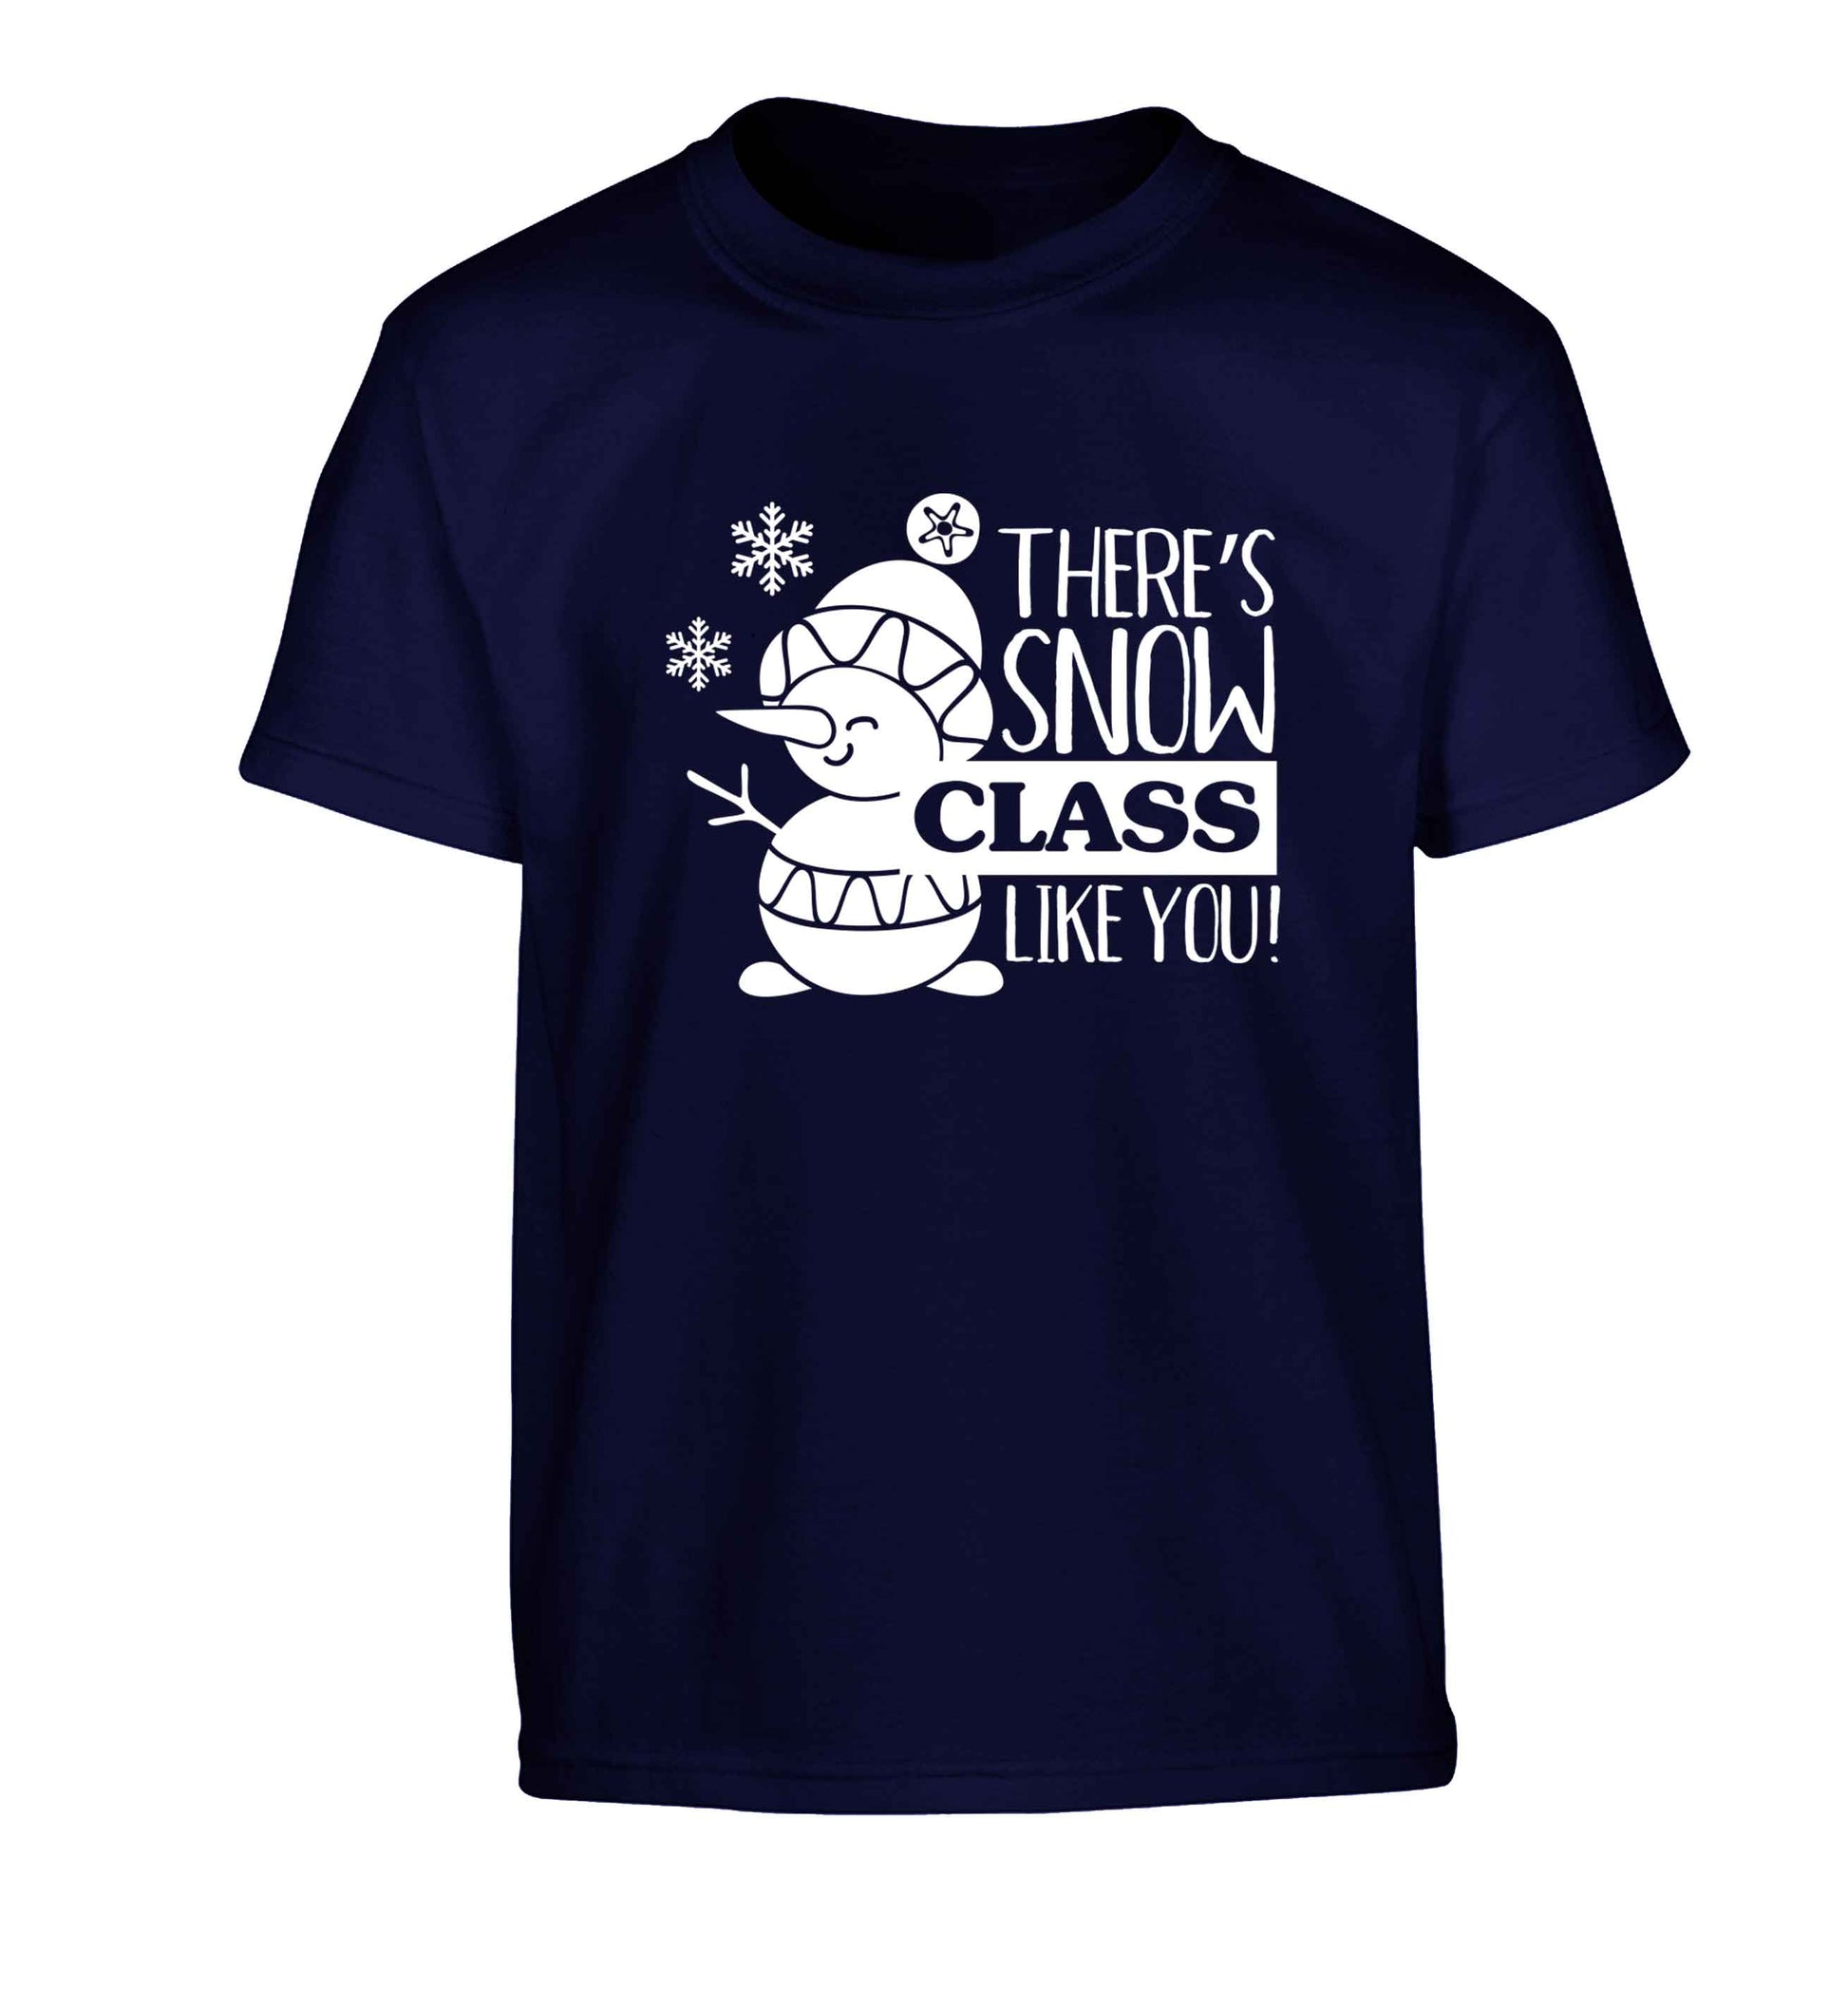 There's snow class like you Children's navy Tshirt 12-13 Years